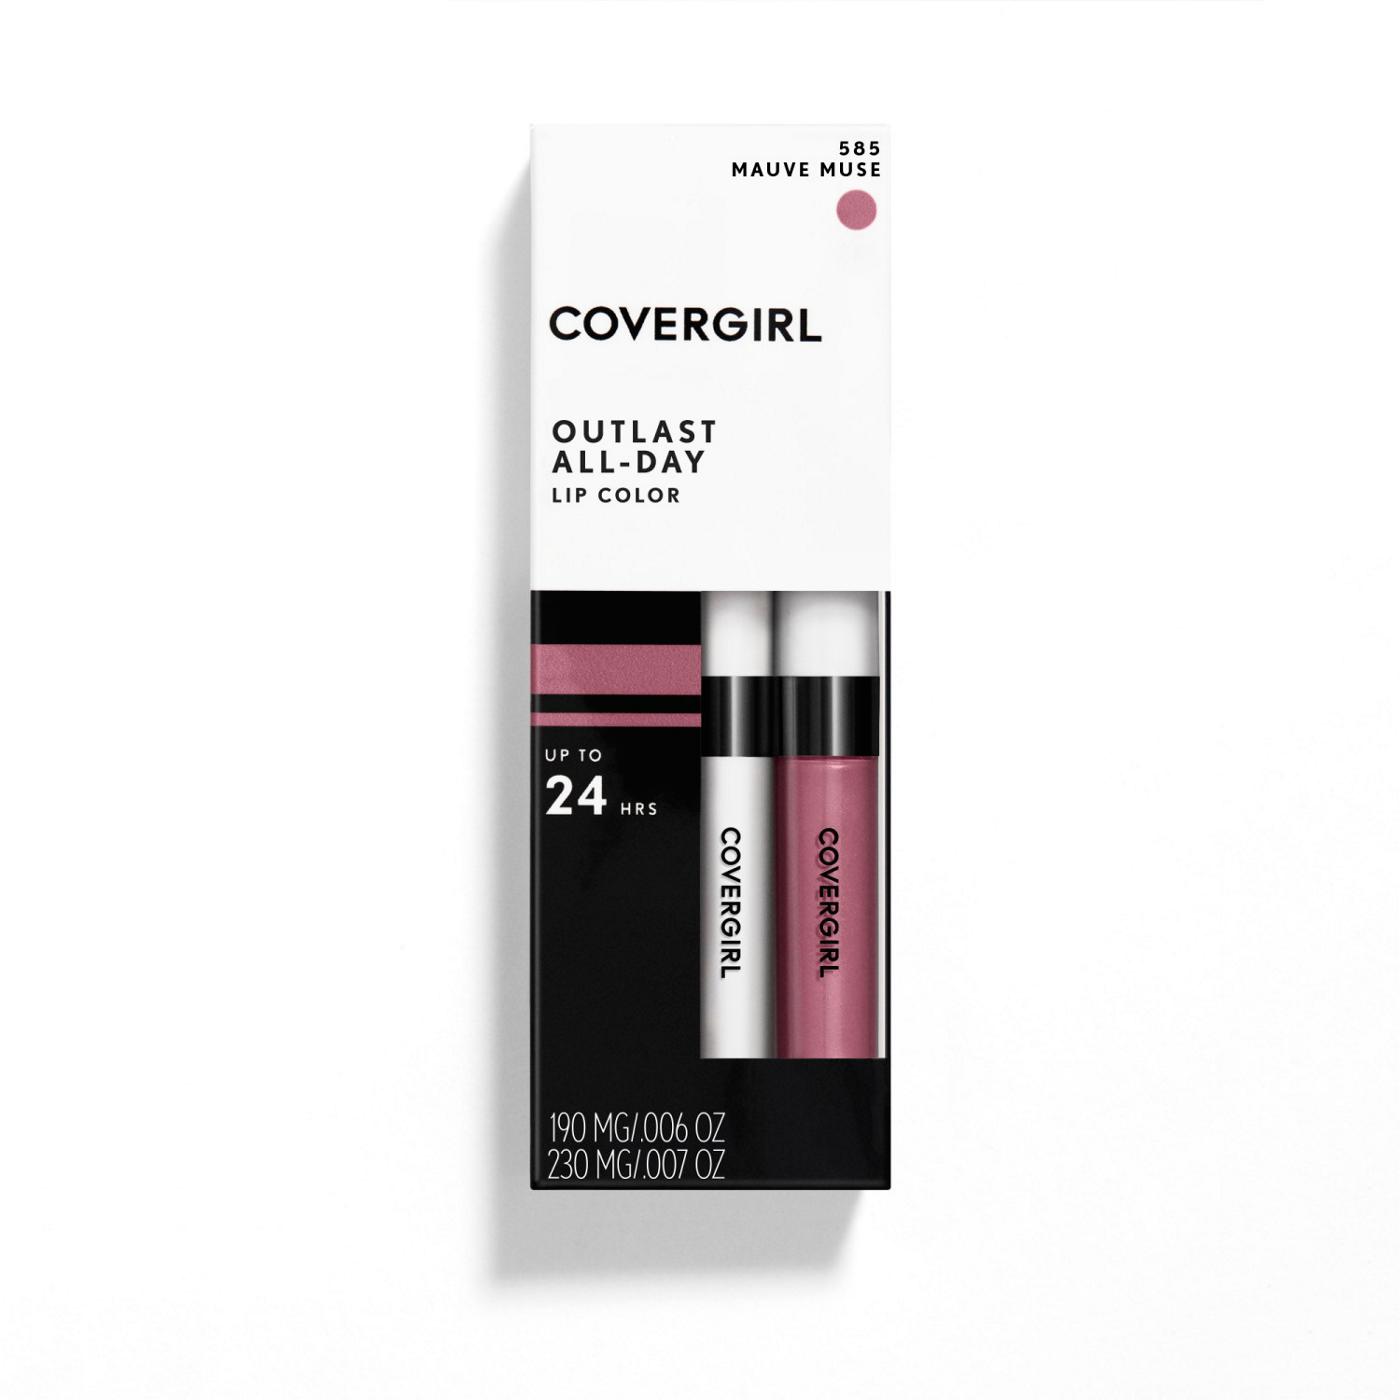 Covergirl Outlast All-Day Lipcolor - 585 Mauve Muse; image 1 of 5